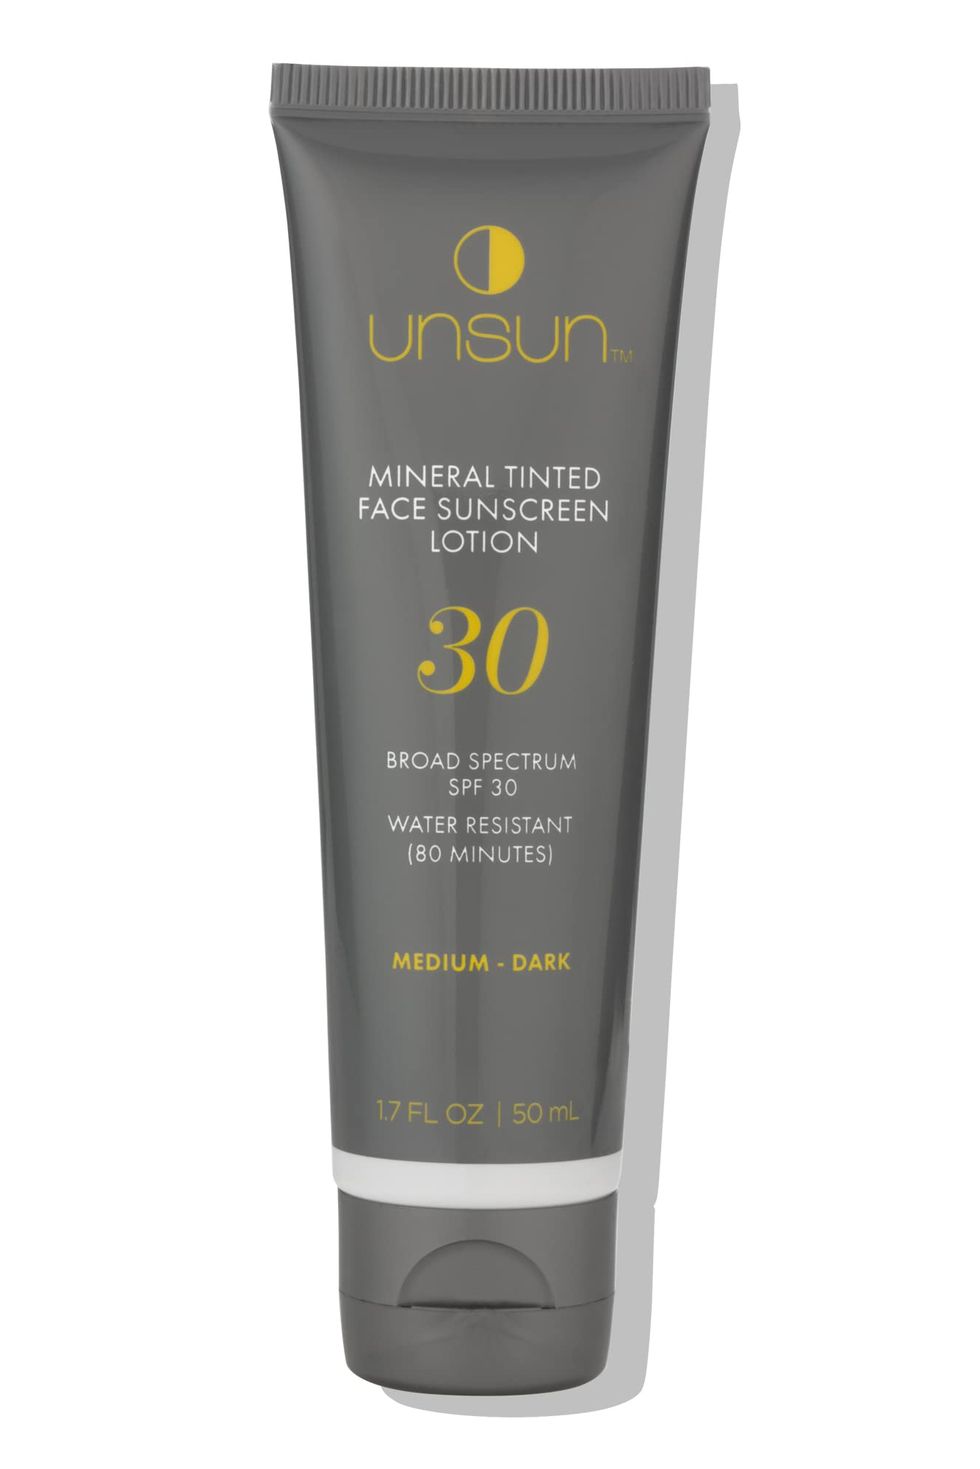 Mineral Tinted Face Sunscreen with Broad Spectrum SPF 30